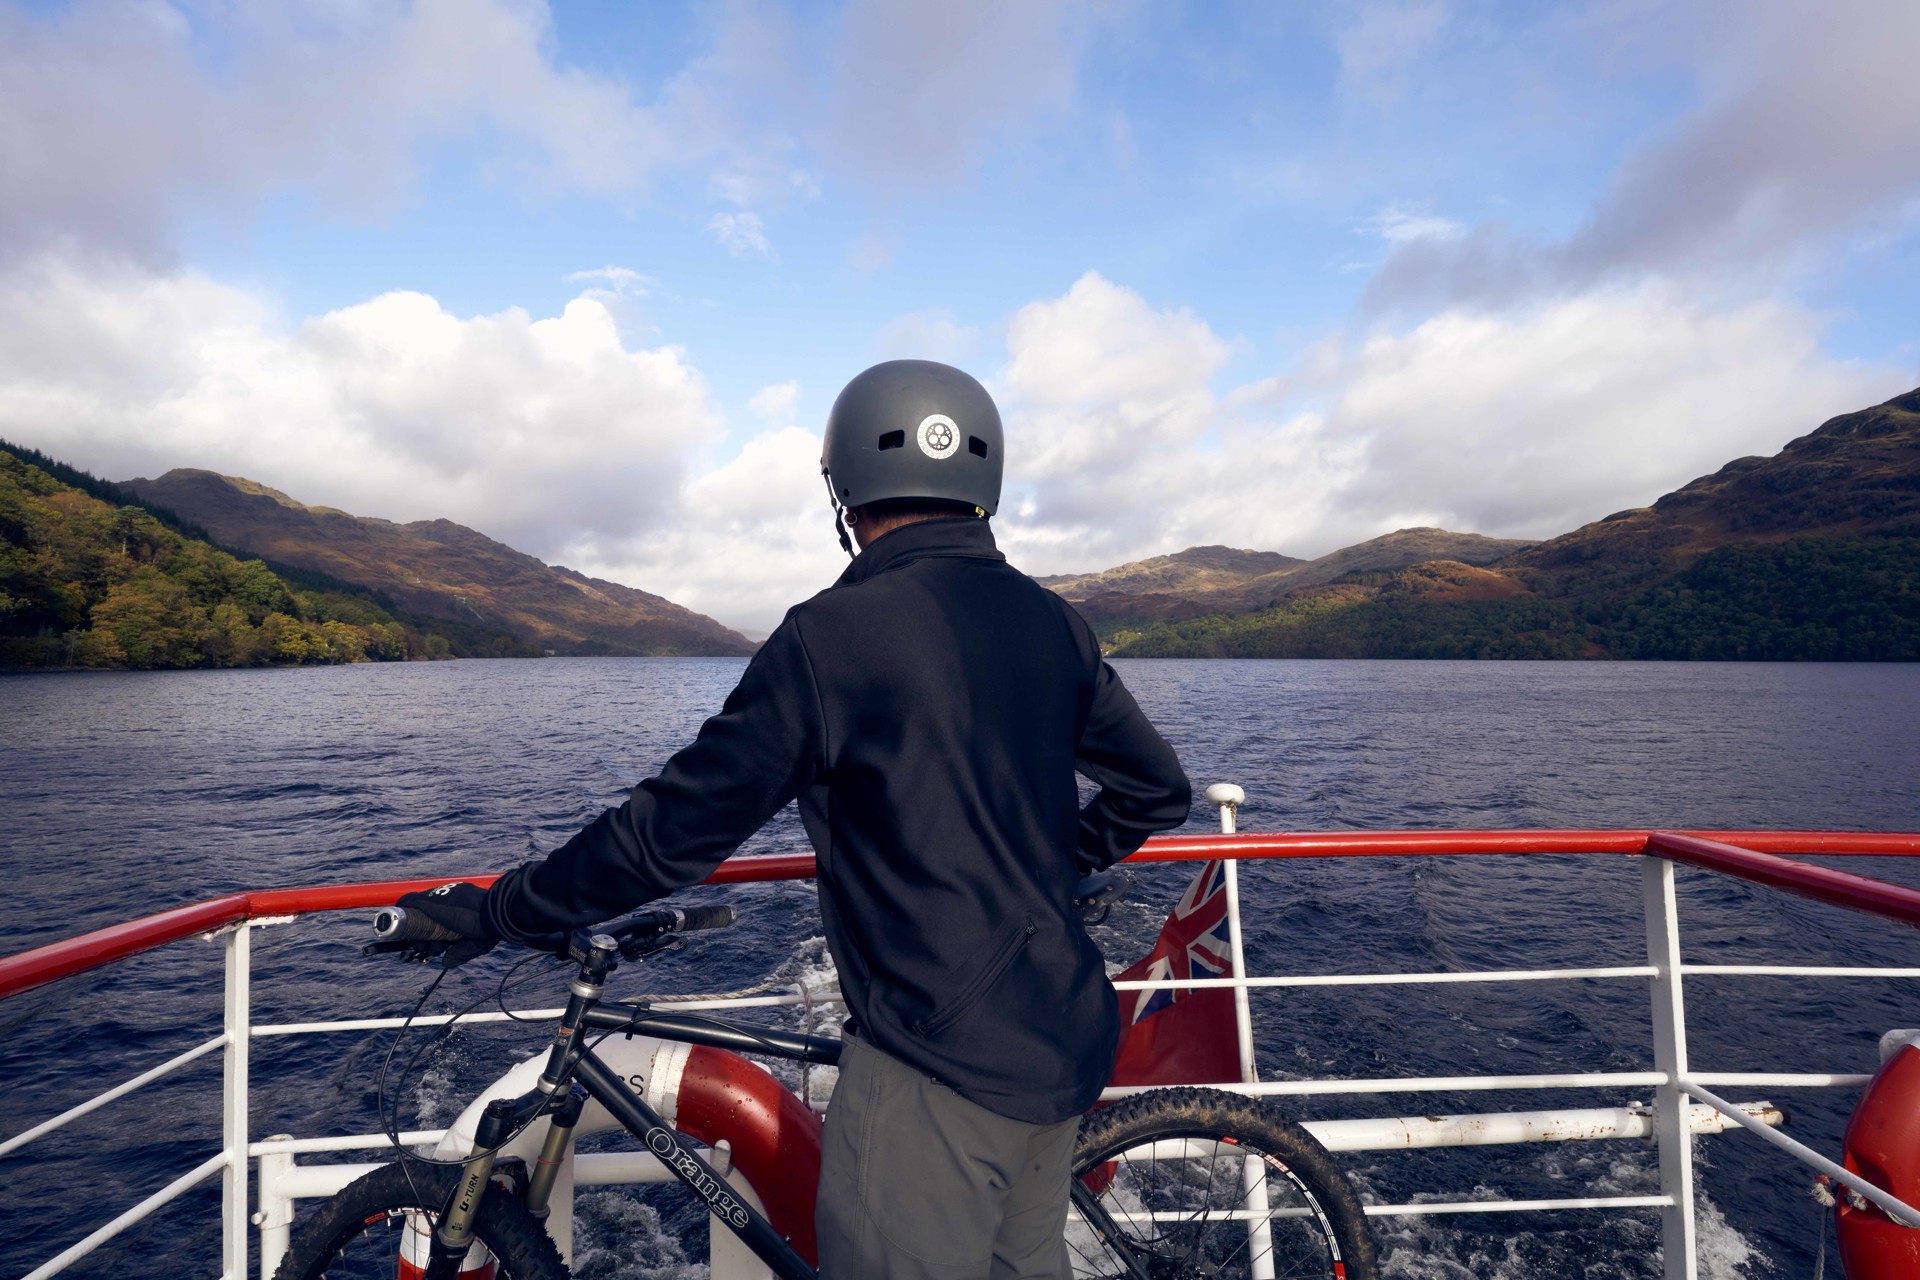 Background image - Cycling_Loch_Lomond_Cruise28_StephenSweeneyPhotography